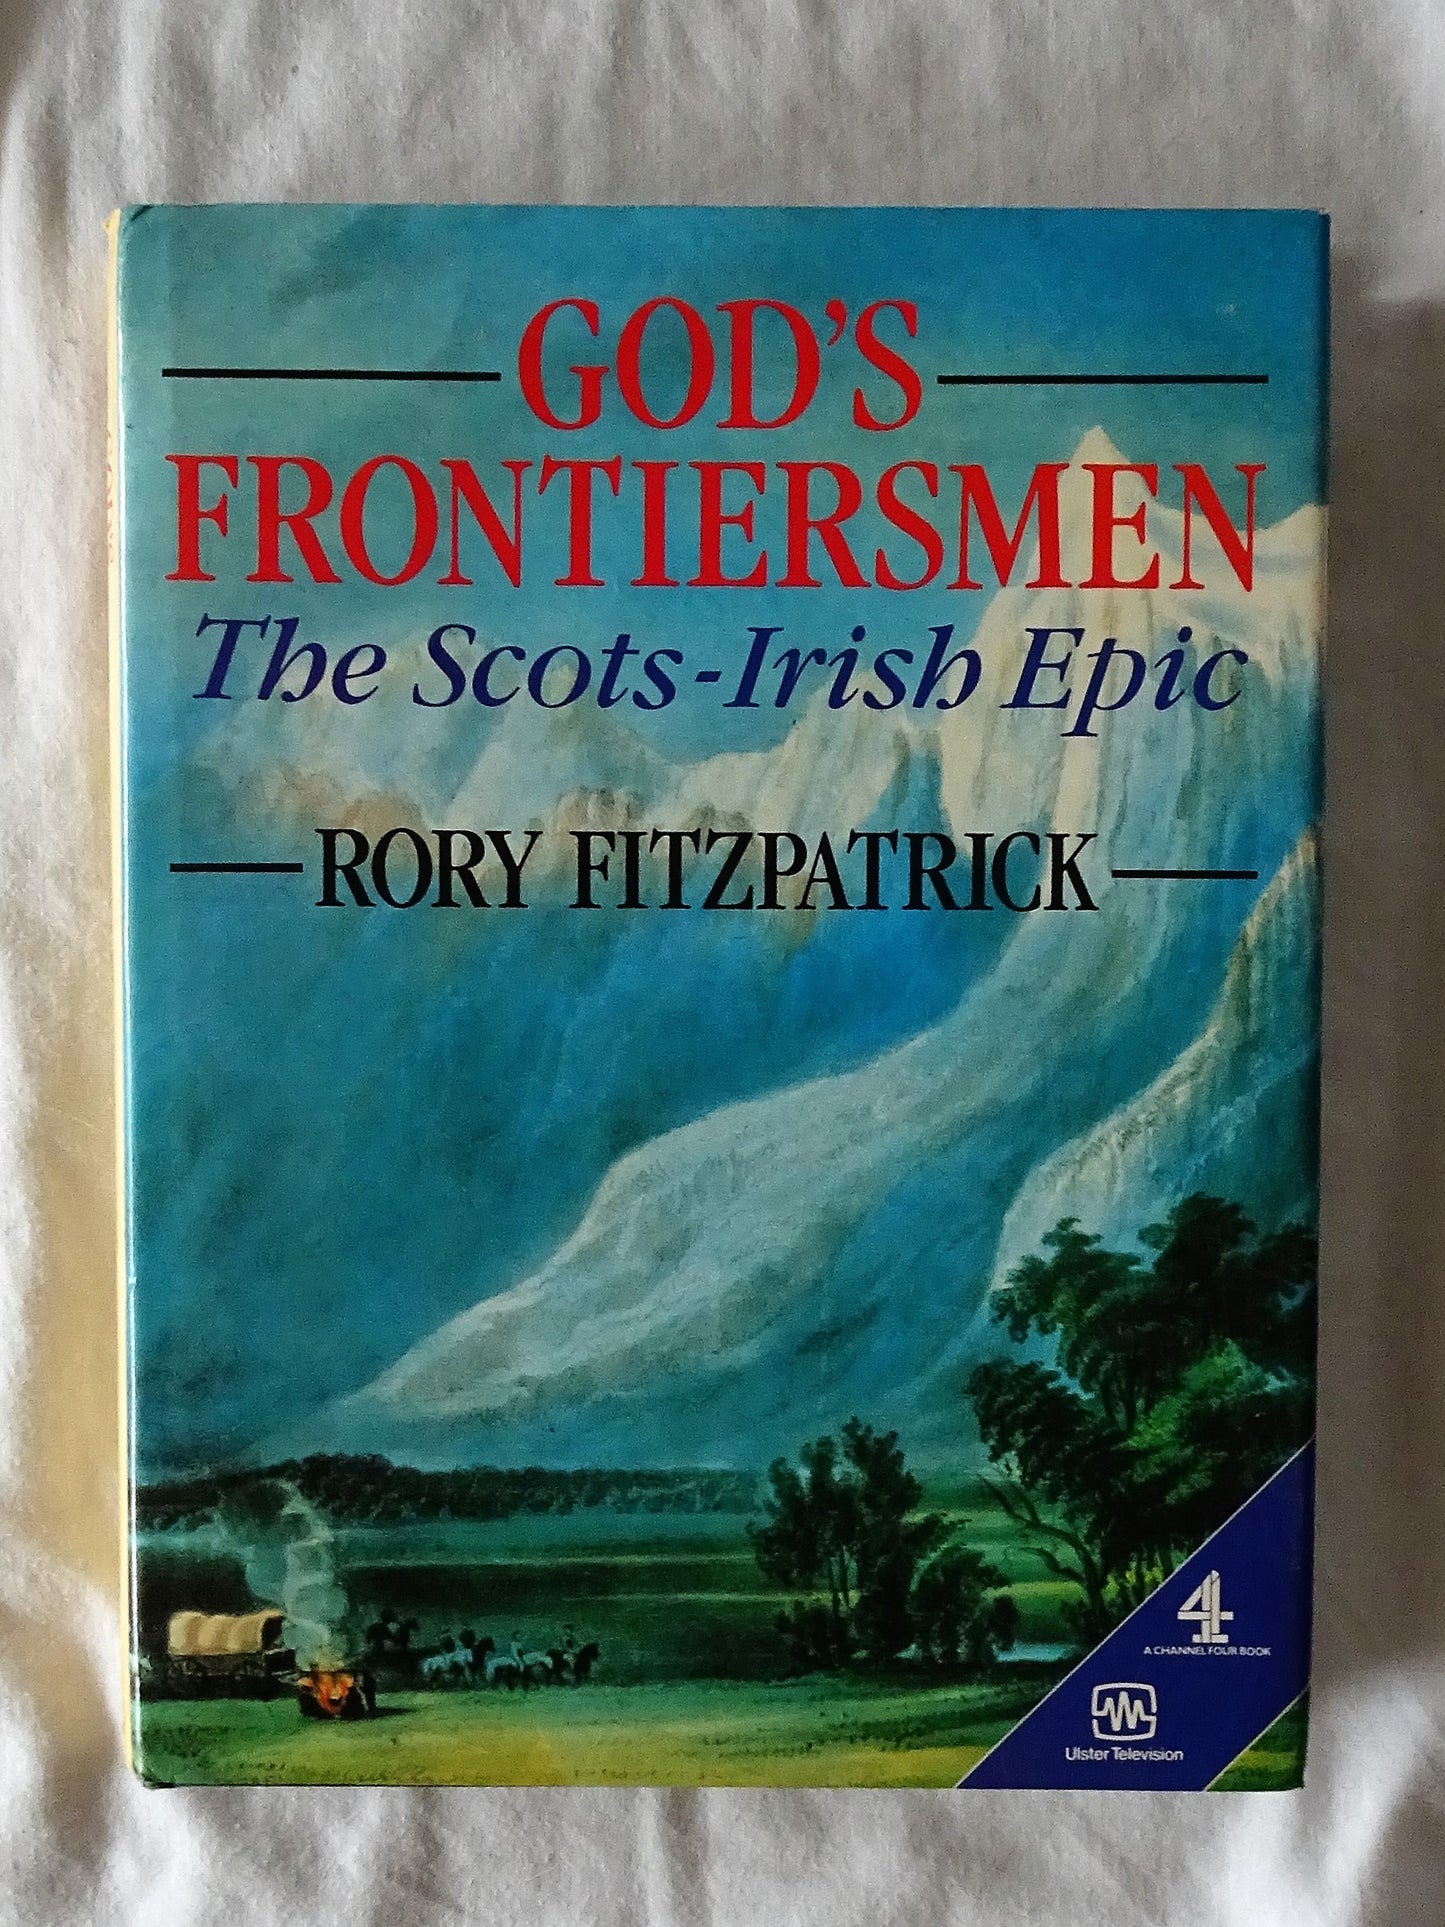 God's Frontiersmen by Rory Fitzpatrcik